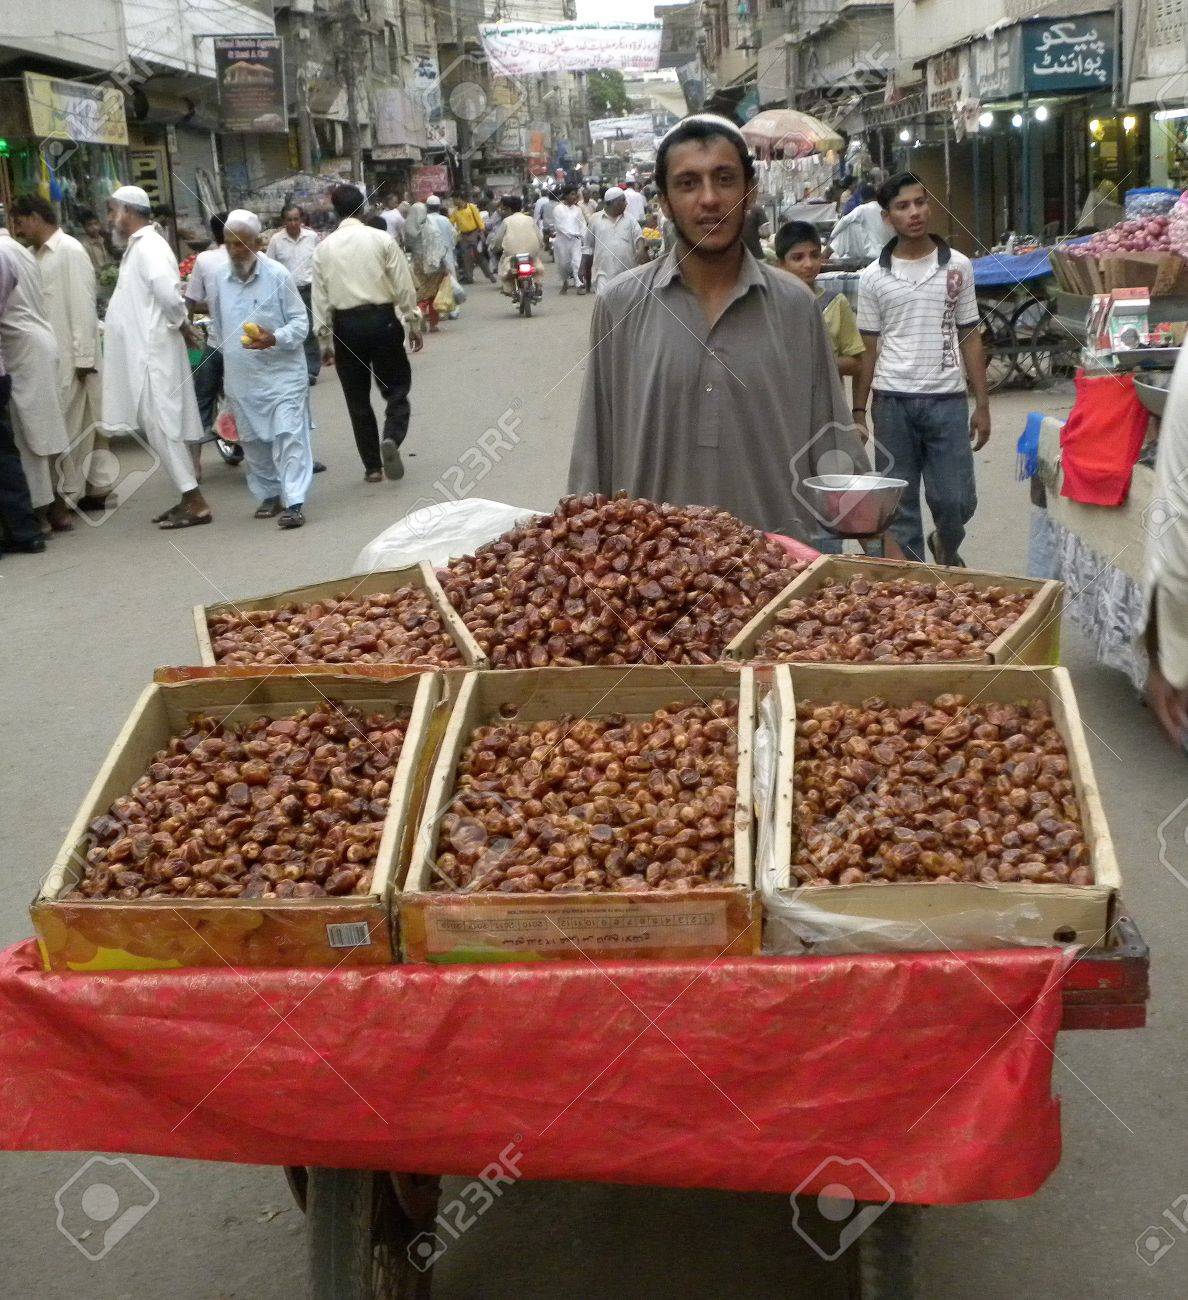 14542171-PAKISTAN-KARACHI-STREET-VENDOR-SELLING-DATES-IN-THE-STREET-IN-THE-HOLY-MONTH-OF-RAMADAM-TODAY-ON-TUE-Stock-Photo.jpg